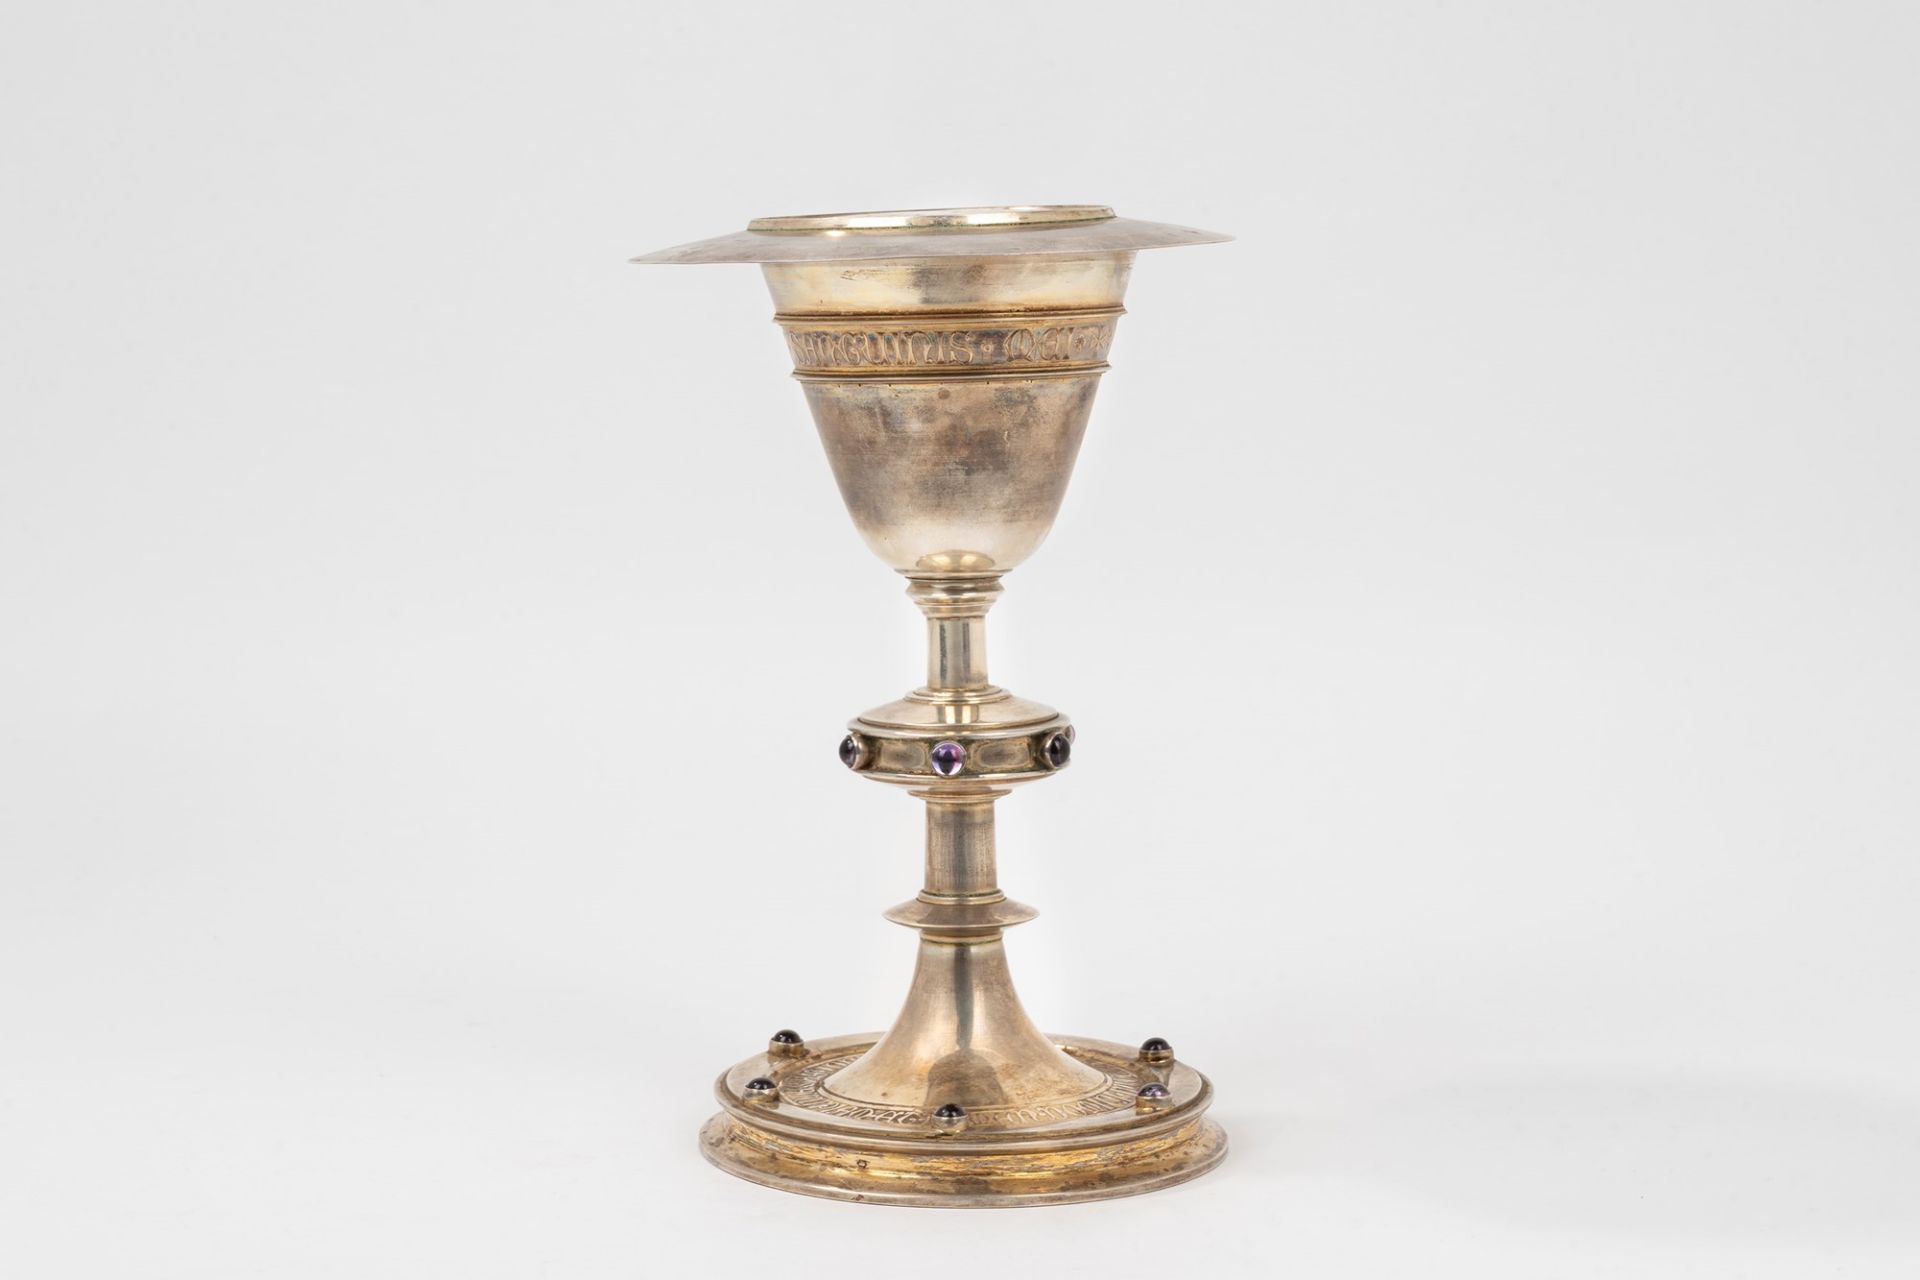 Large silver chalice with saucer, France, late 19th century - Image 2 of 7